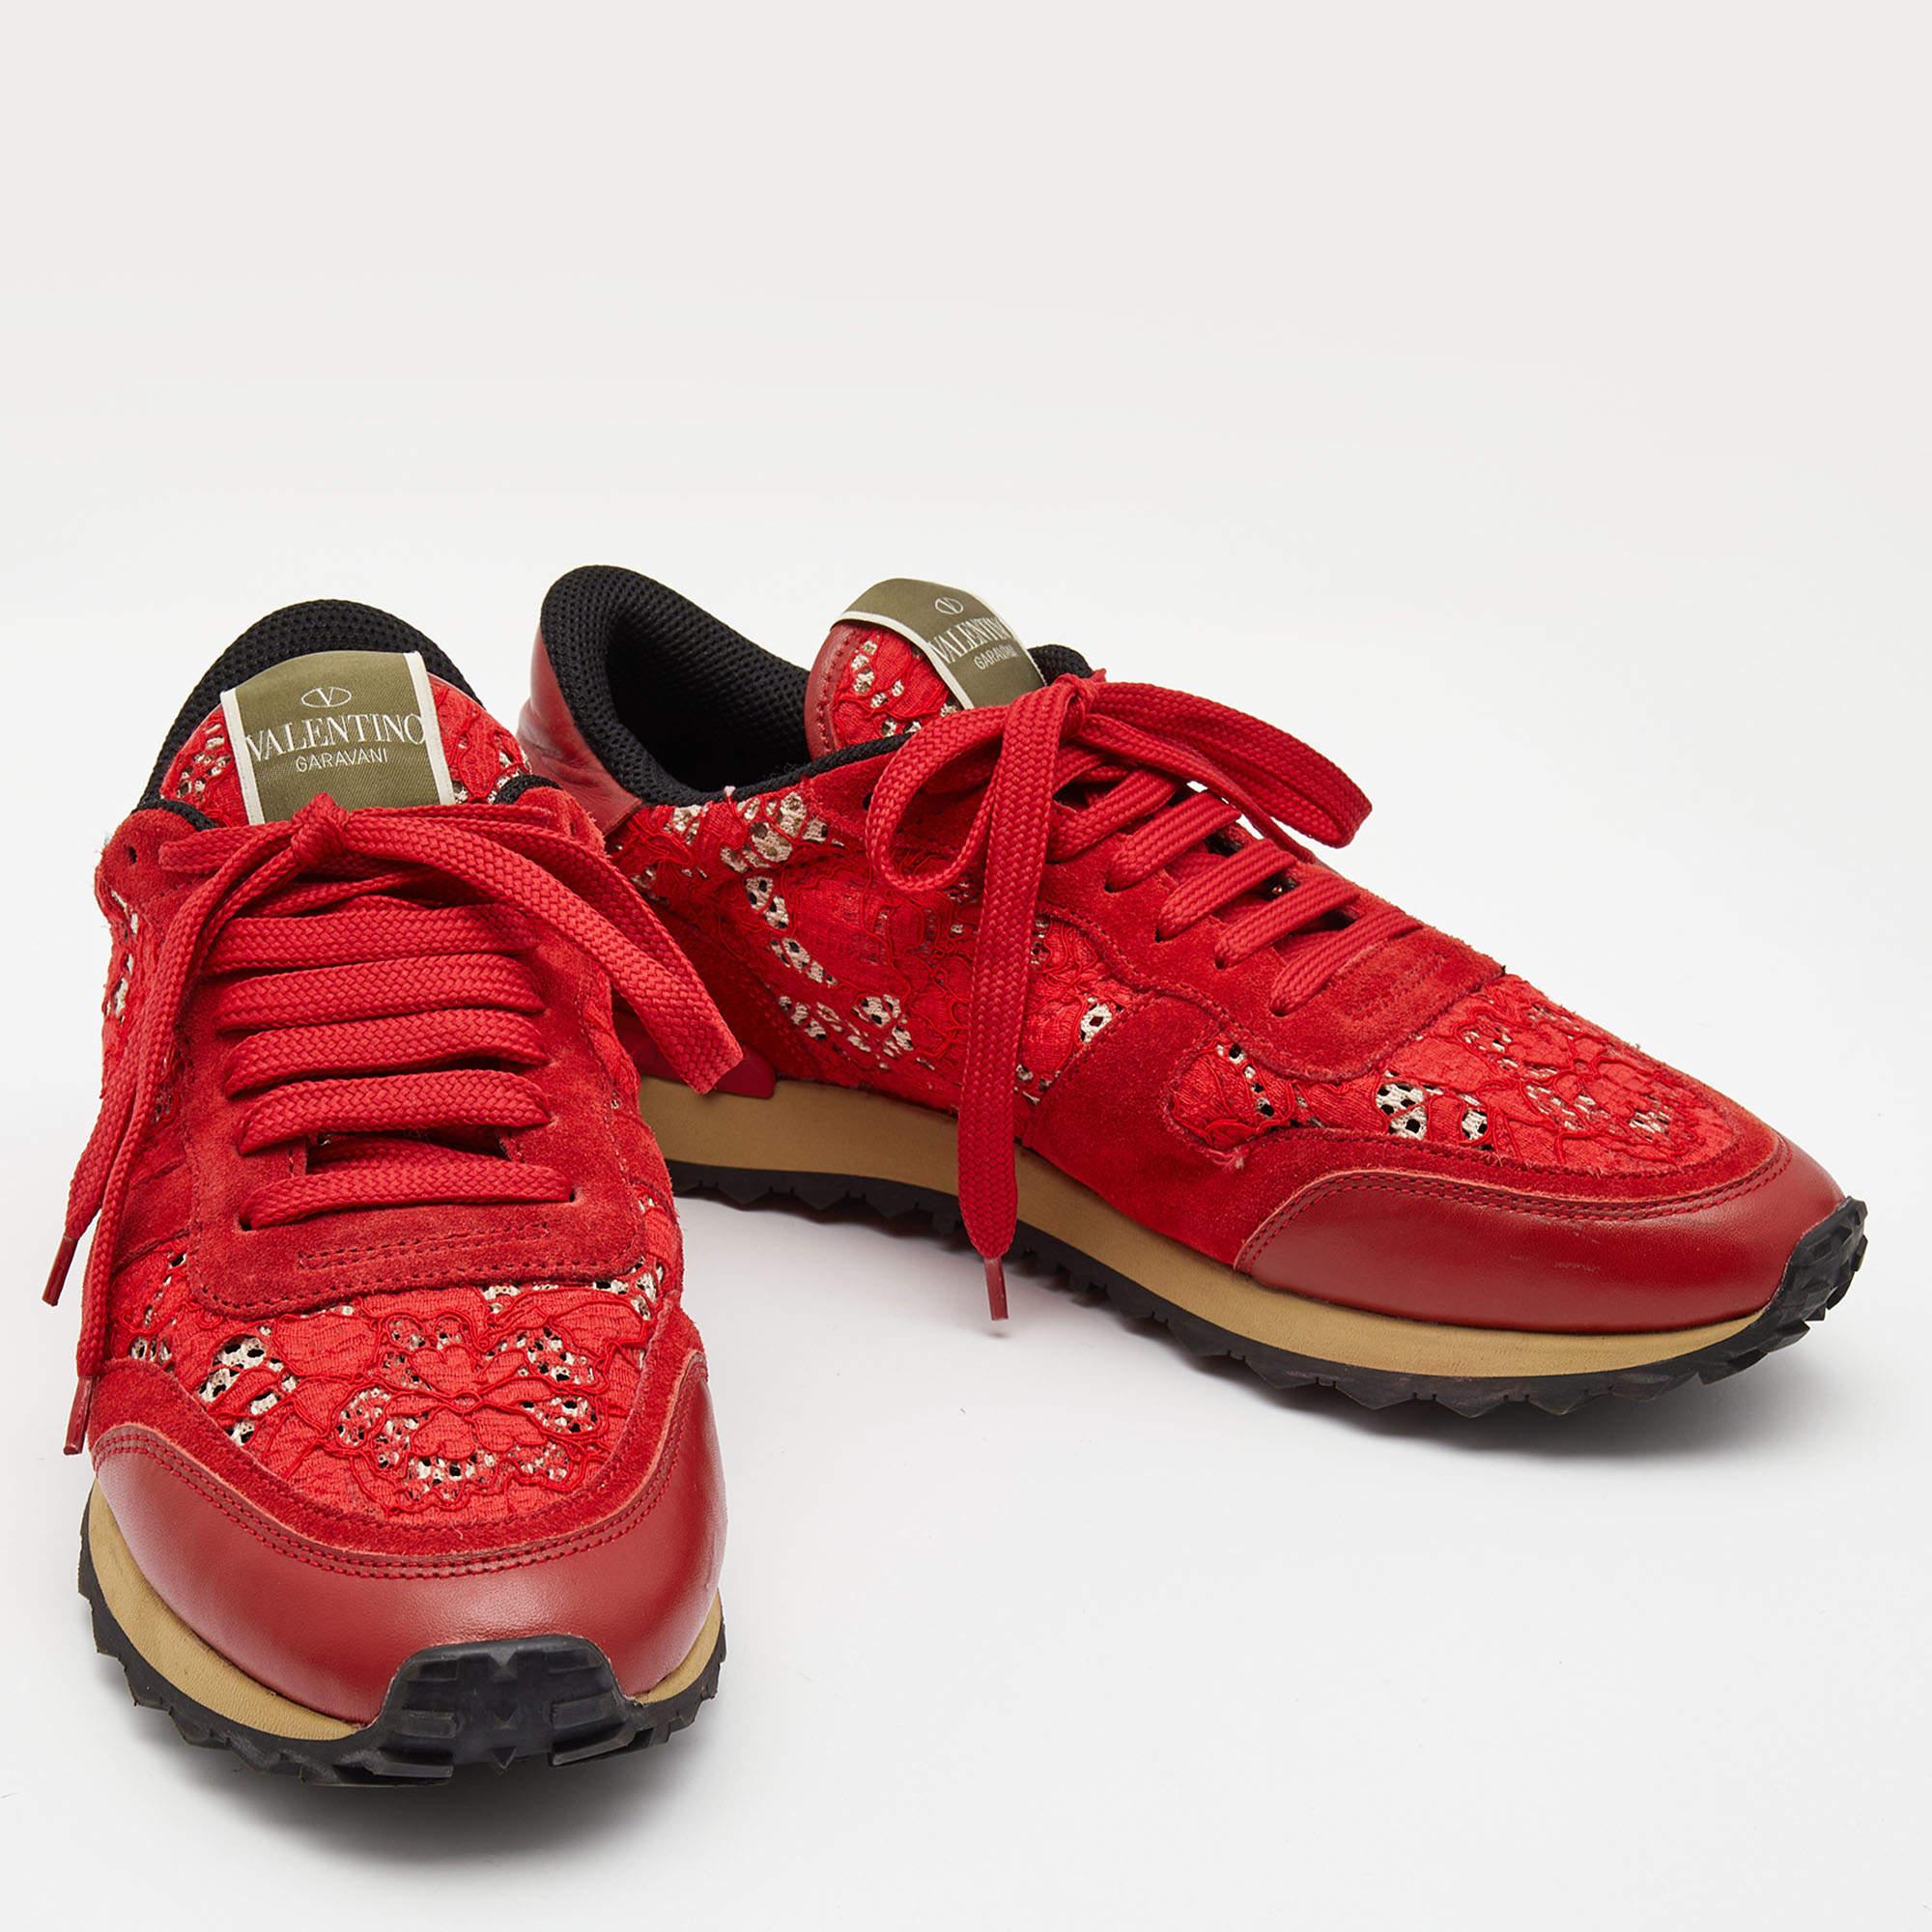 Valentino Red Lace and Suede Rockrunner Low Top Sneakers Size 40 In Excellent Condition For Sale In Dubai, Al Qouz 2